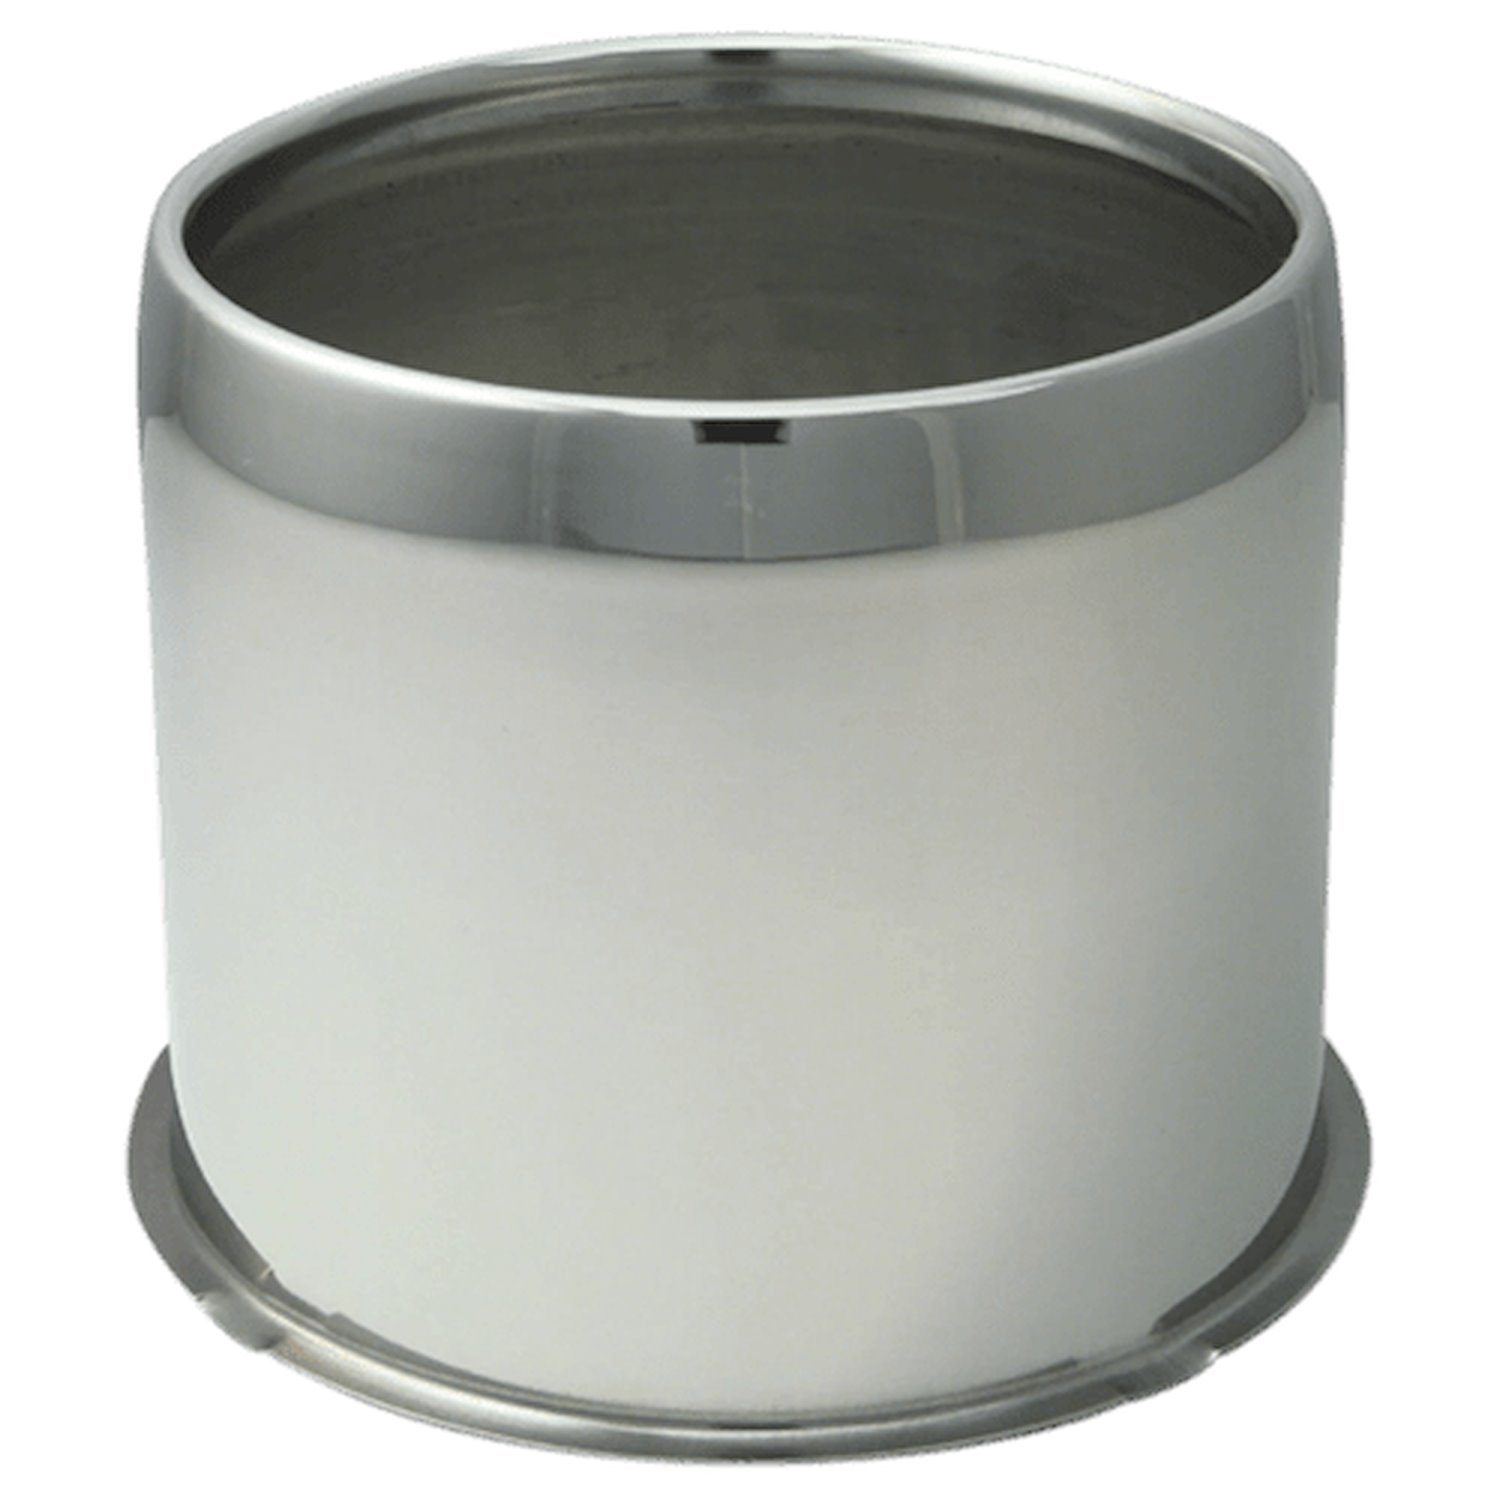 HC212SS Hub Cover, 5.1" I.D., Open-End, Stainless Steel